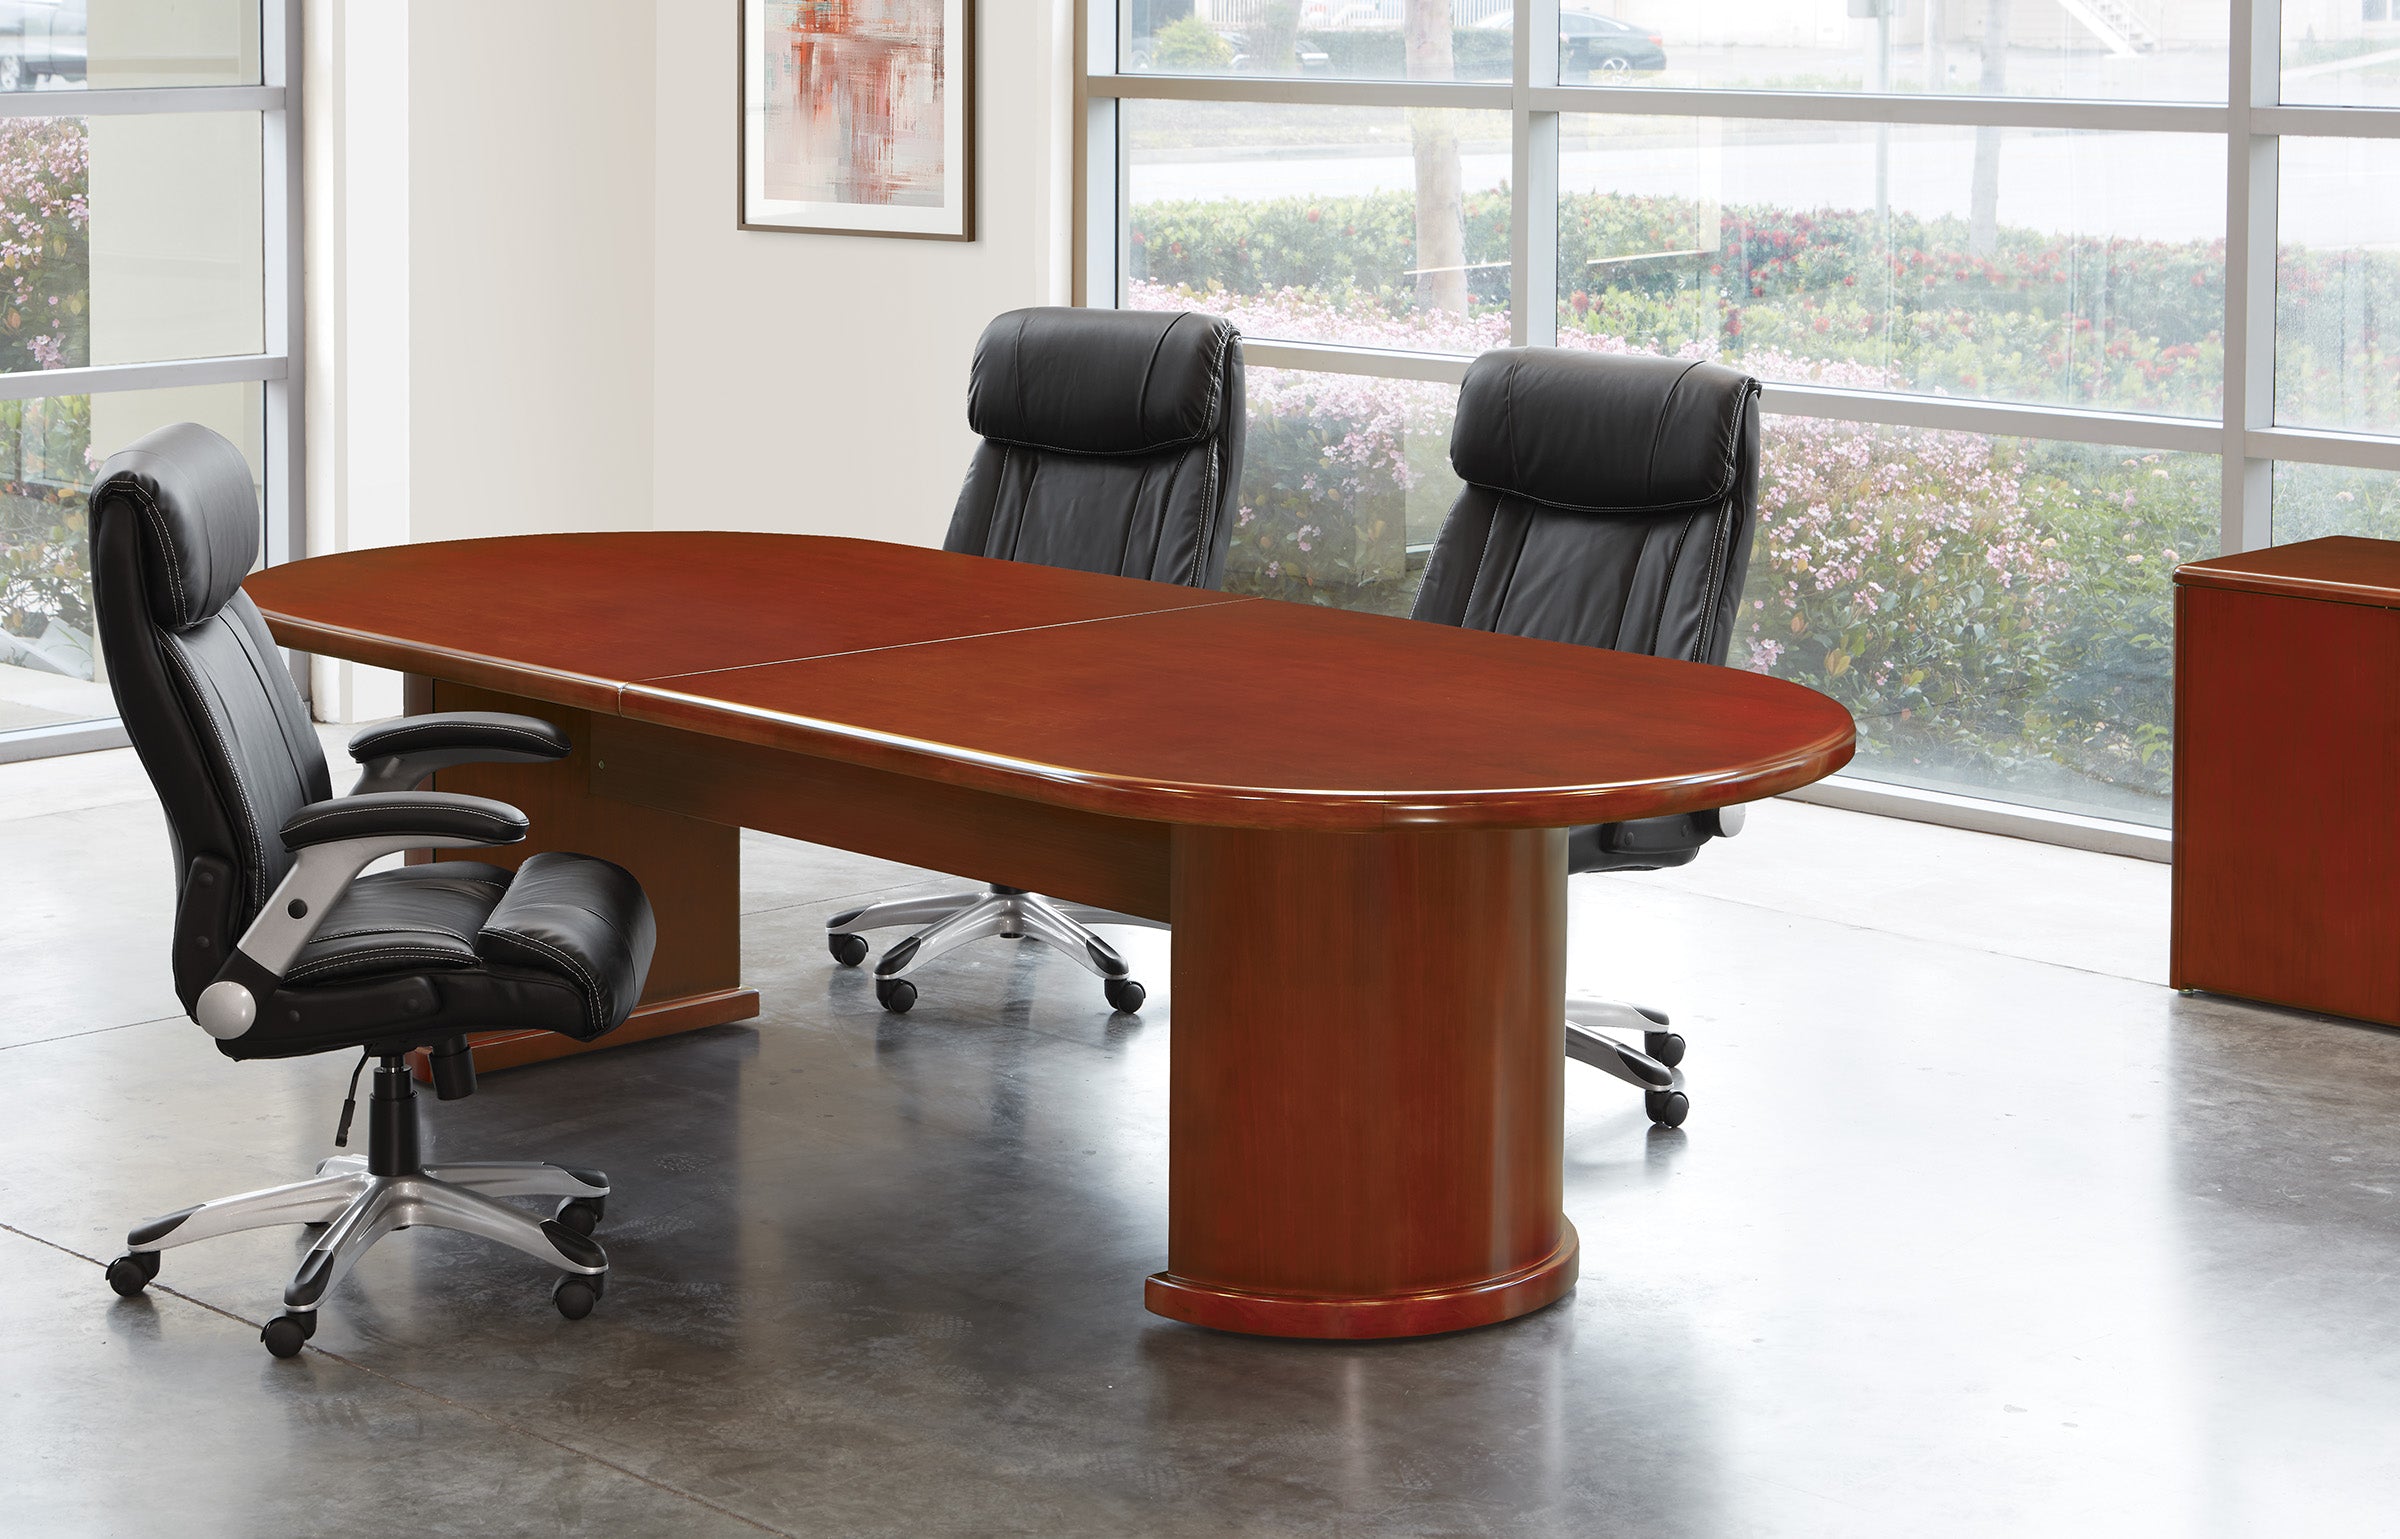 SON61 - Sonoma Racetrack 10' Conference Table by Office Star